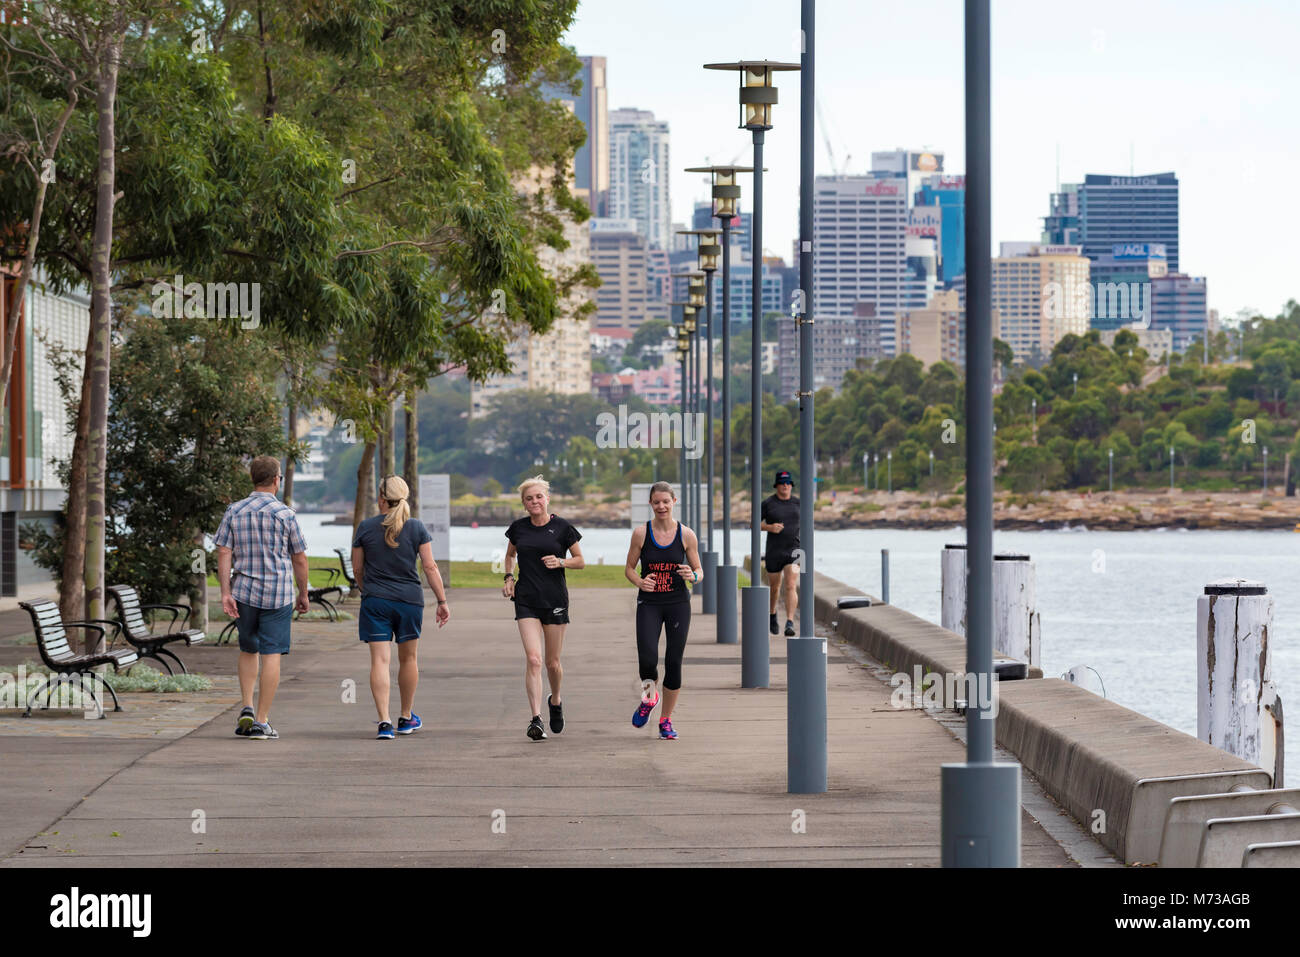 People walking and exercising along a promenade beside Sydney Harbor in Pyrmont, Australia Stock Photo